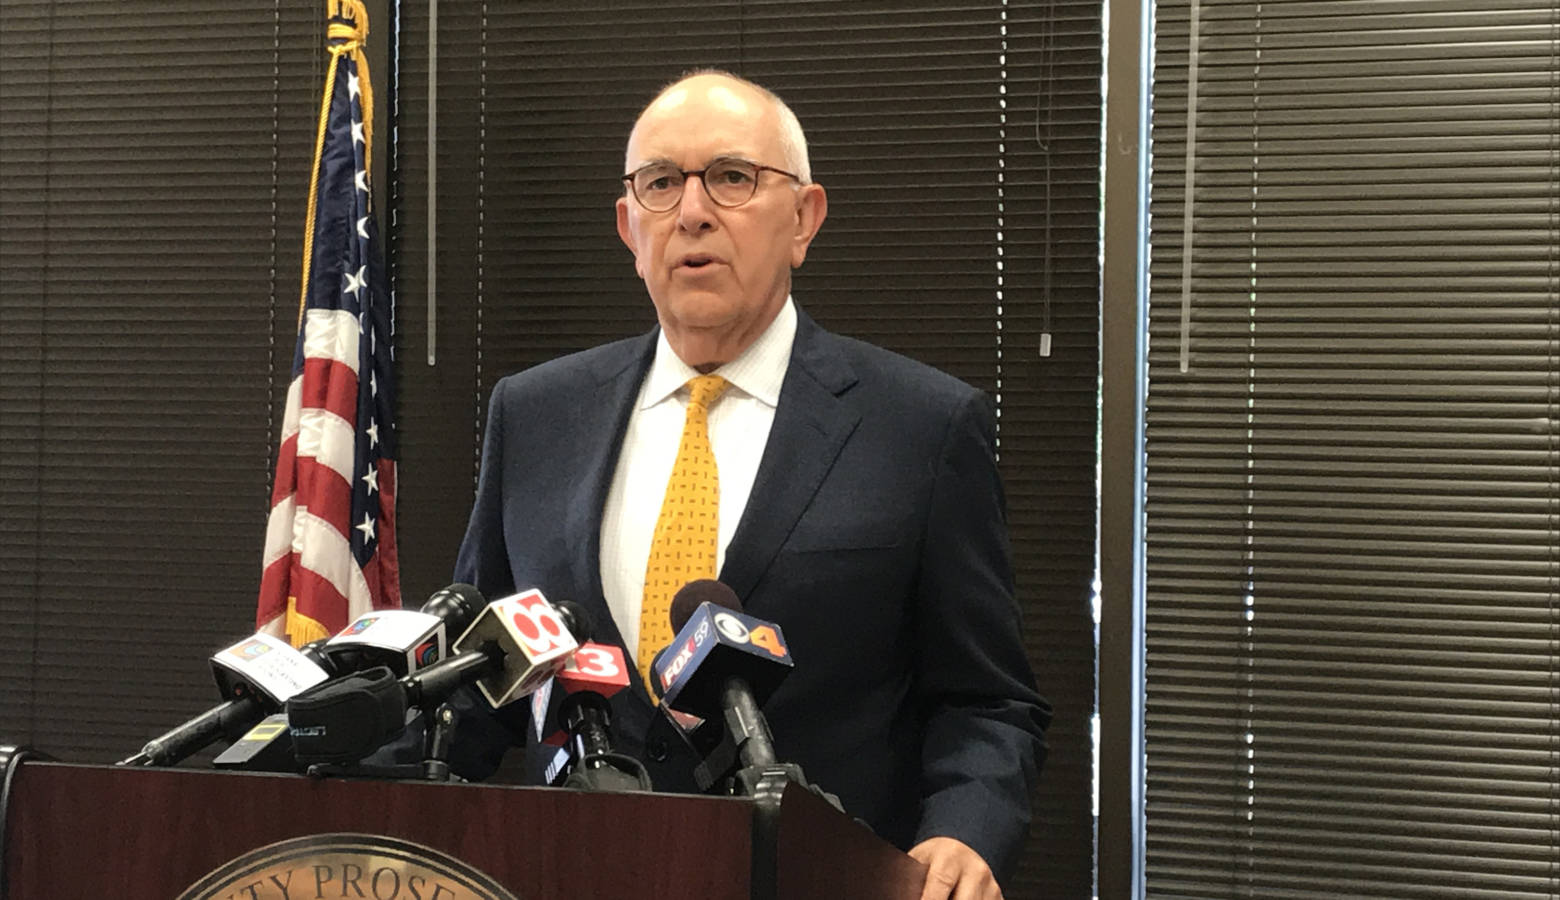 Marion County Prosecutor Terry Curry says he can't handle any issues related to allegations against Attorney General Curtis Hill because Hill's office represents him in court. (Brandon Smith/IPB News)